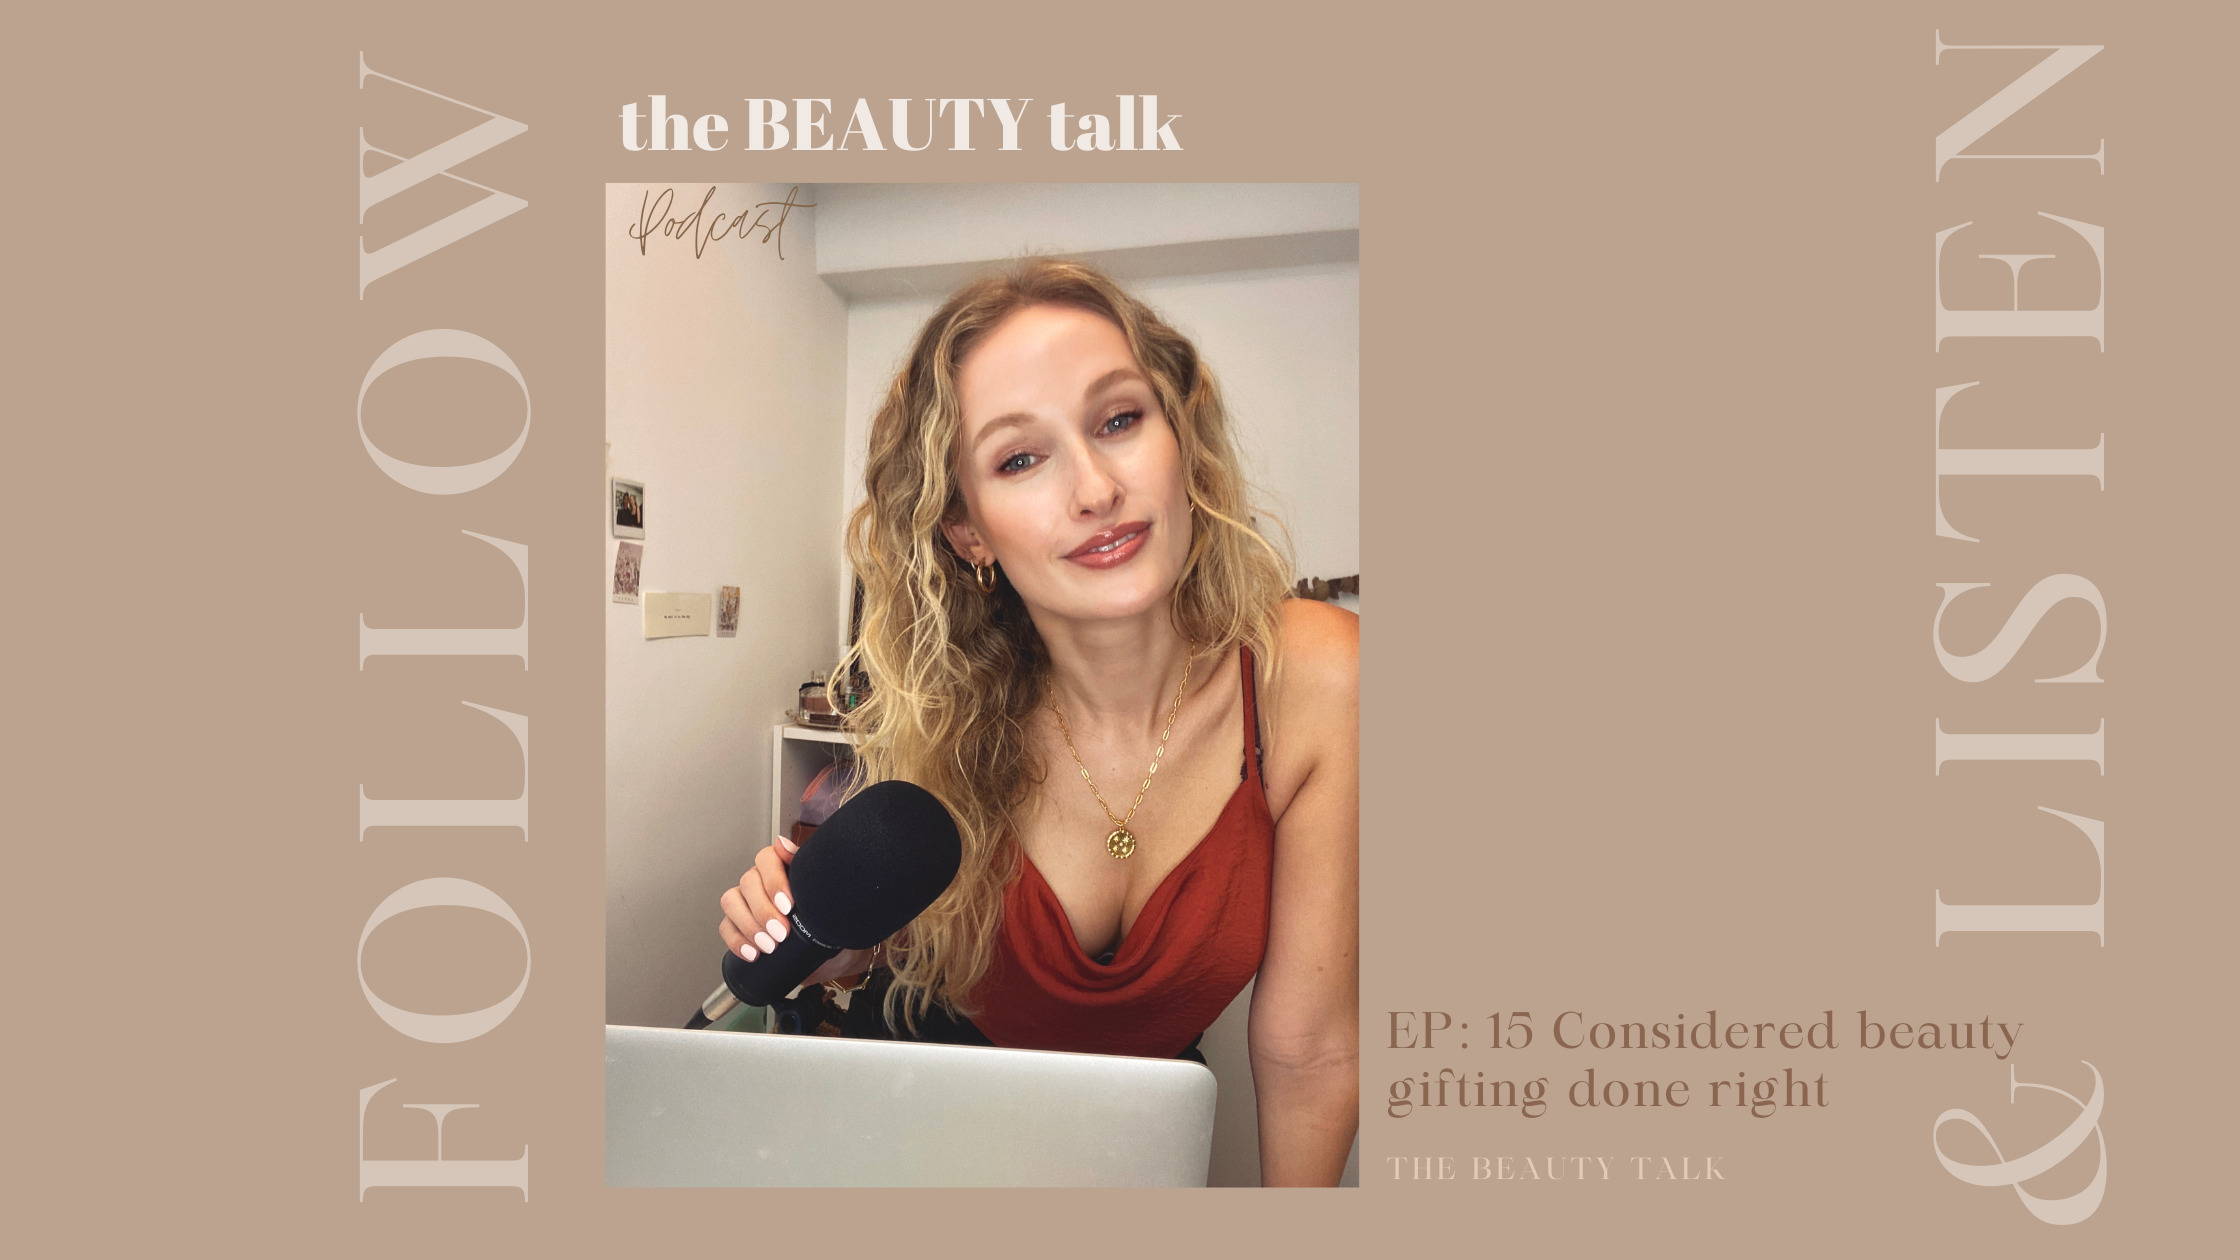 EP: 15 Considered beauty gifting done right